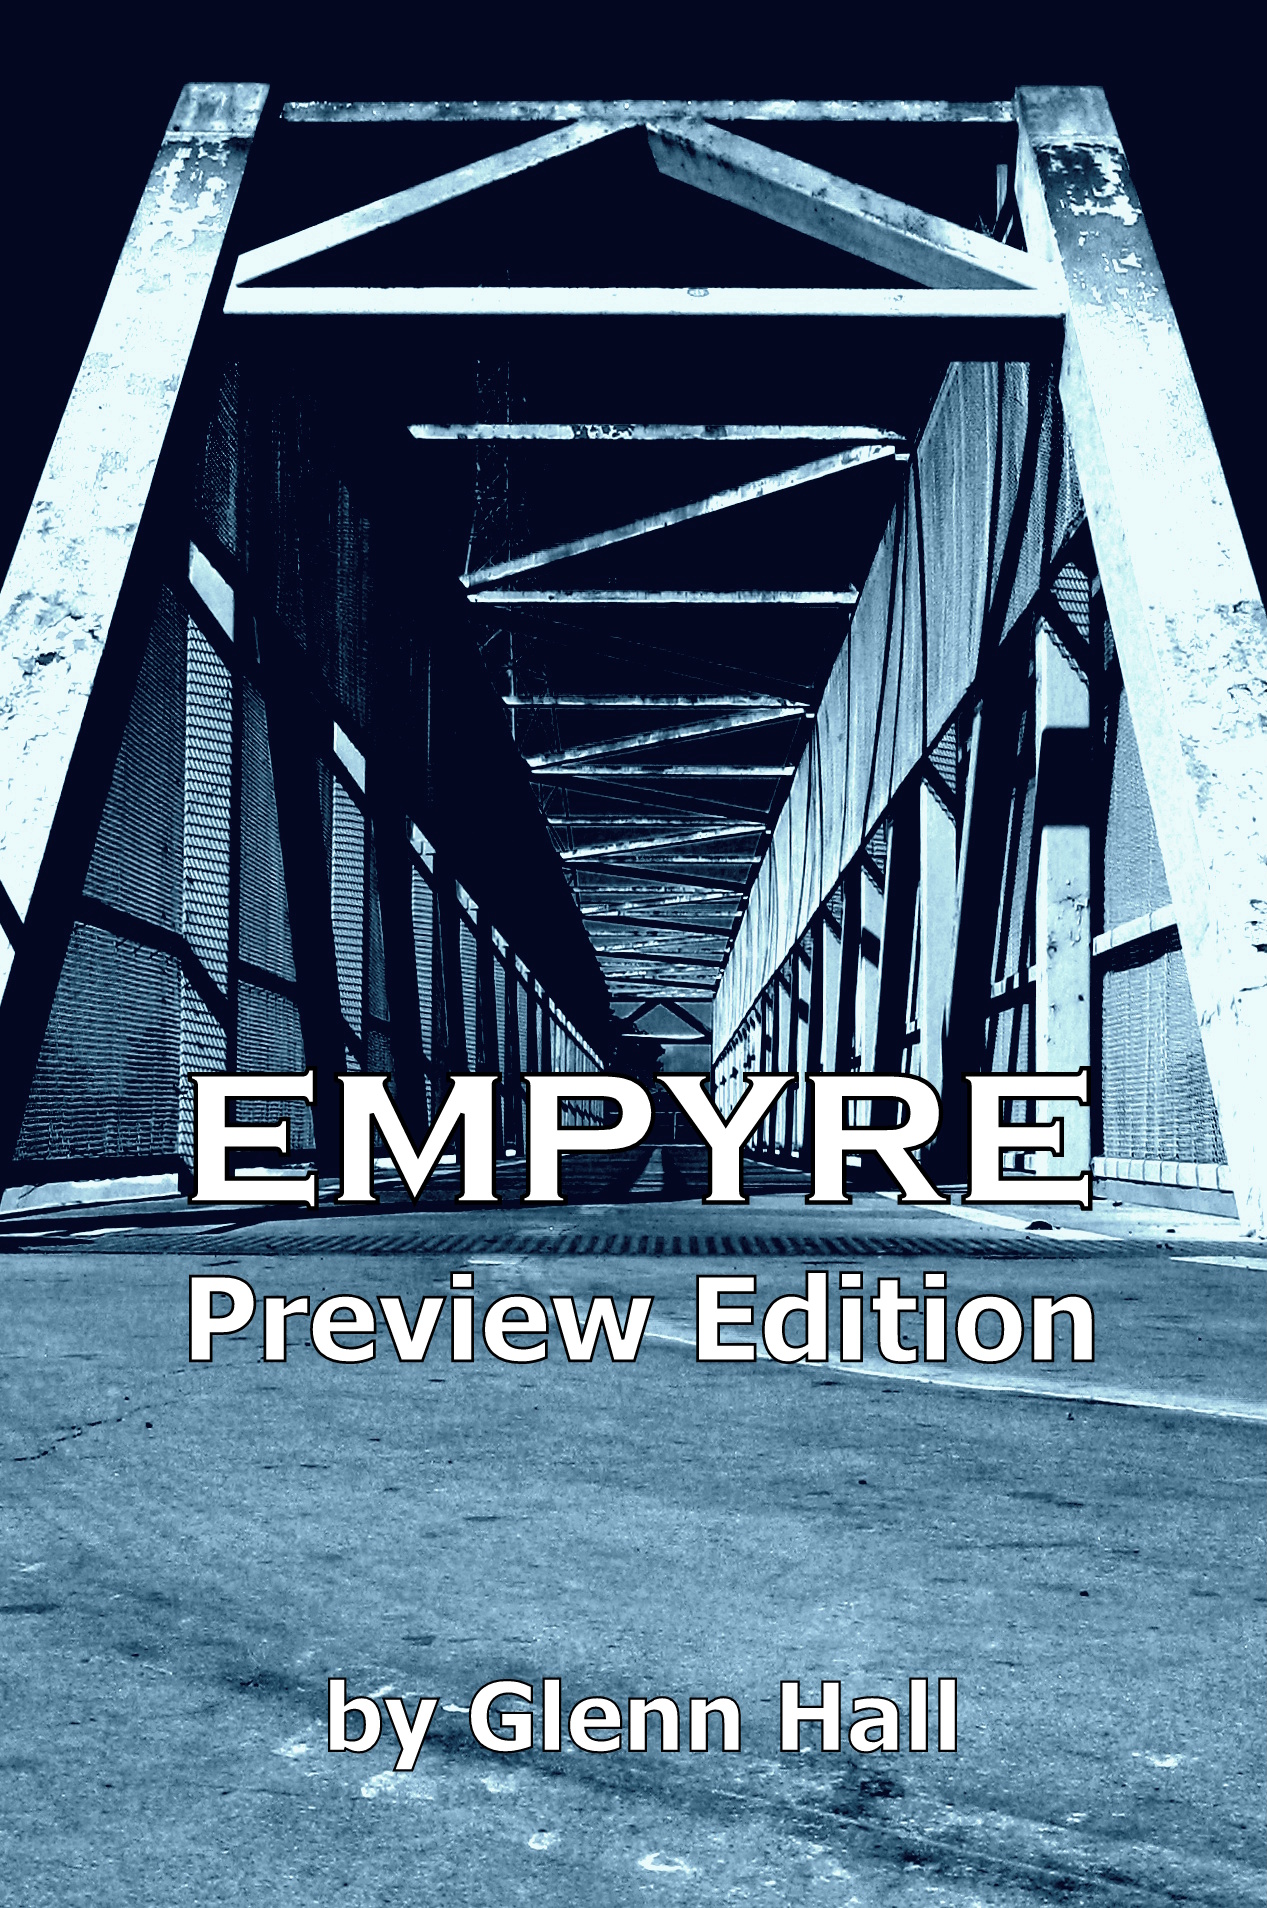 Empyre Preview Edition by author Glenn Hall the ModHatter